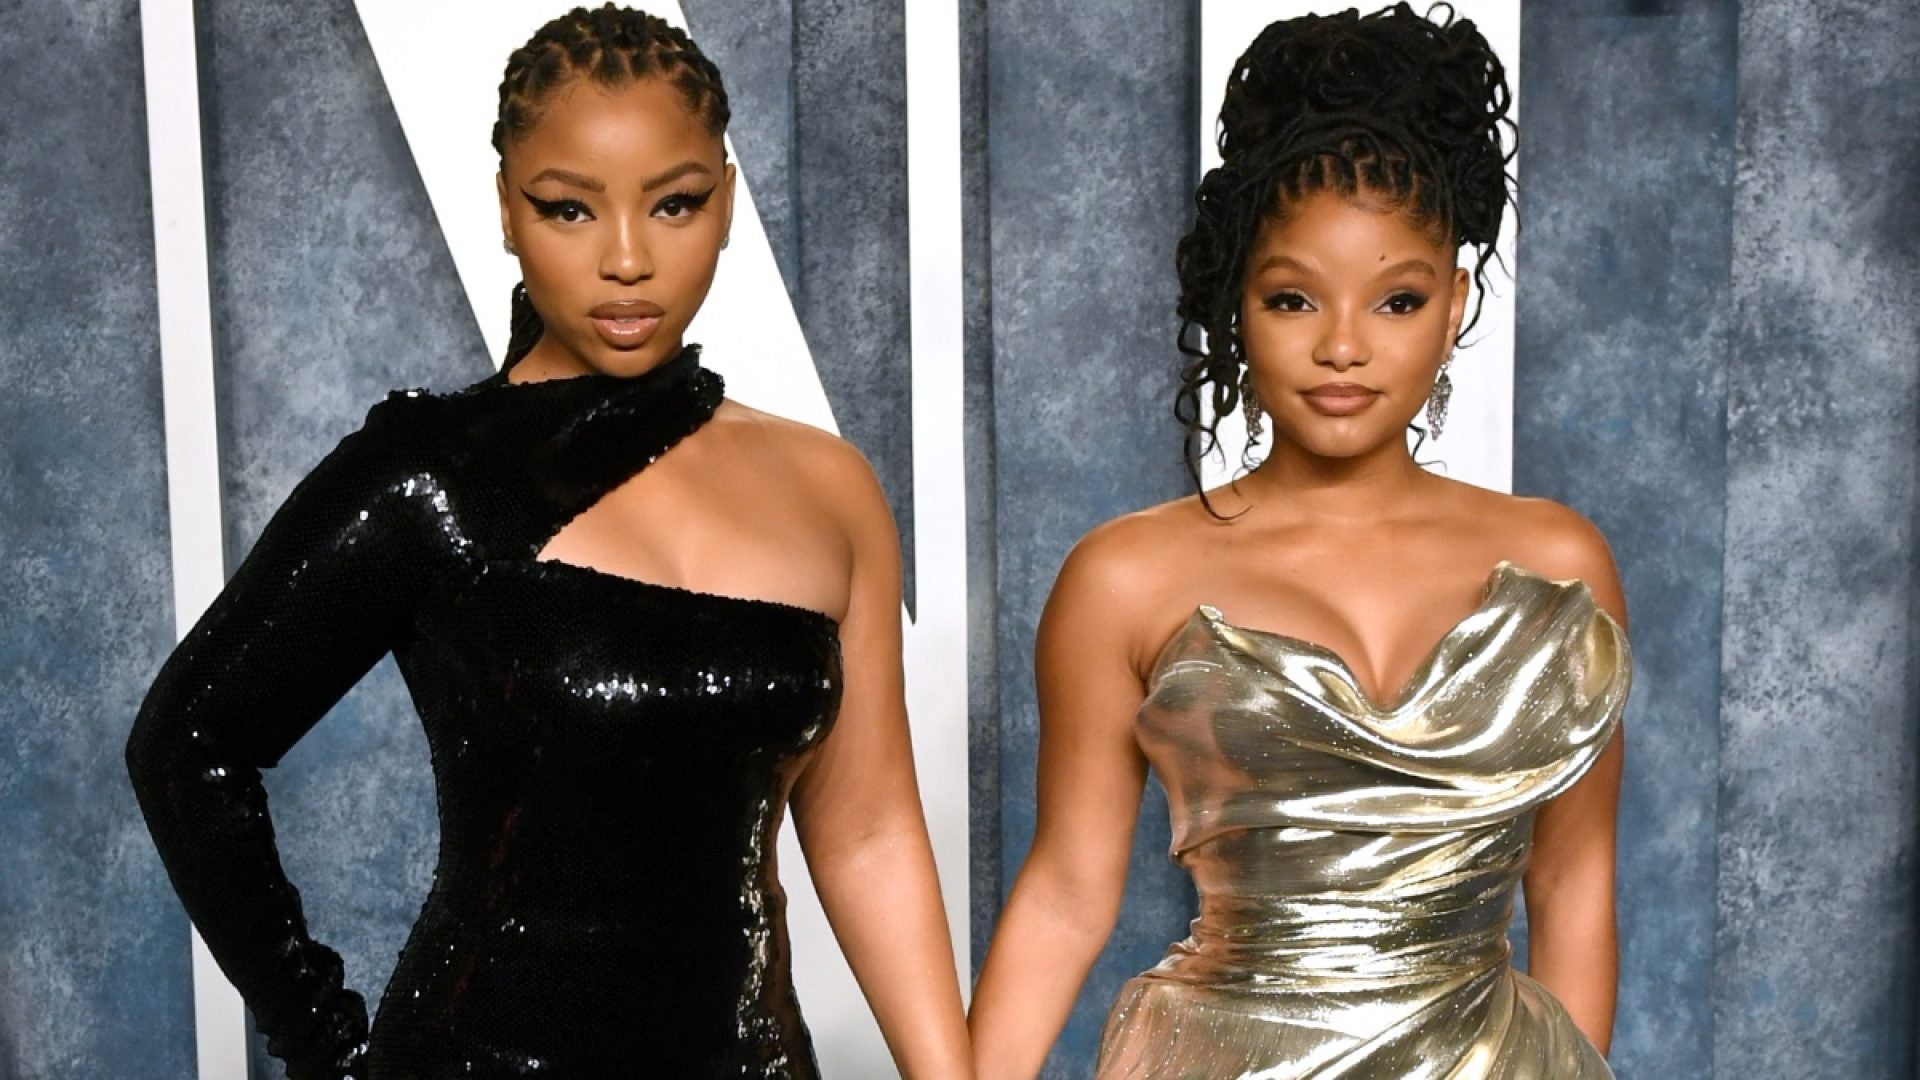 Chlöe And Halle Bailey Working On New Album: “It’s Going To Be Special”